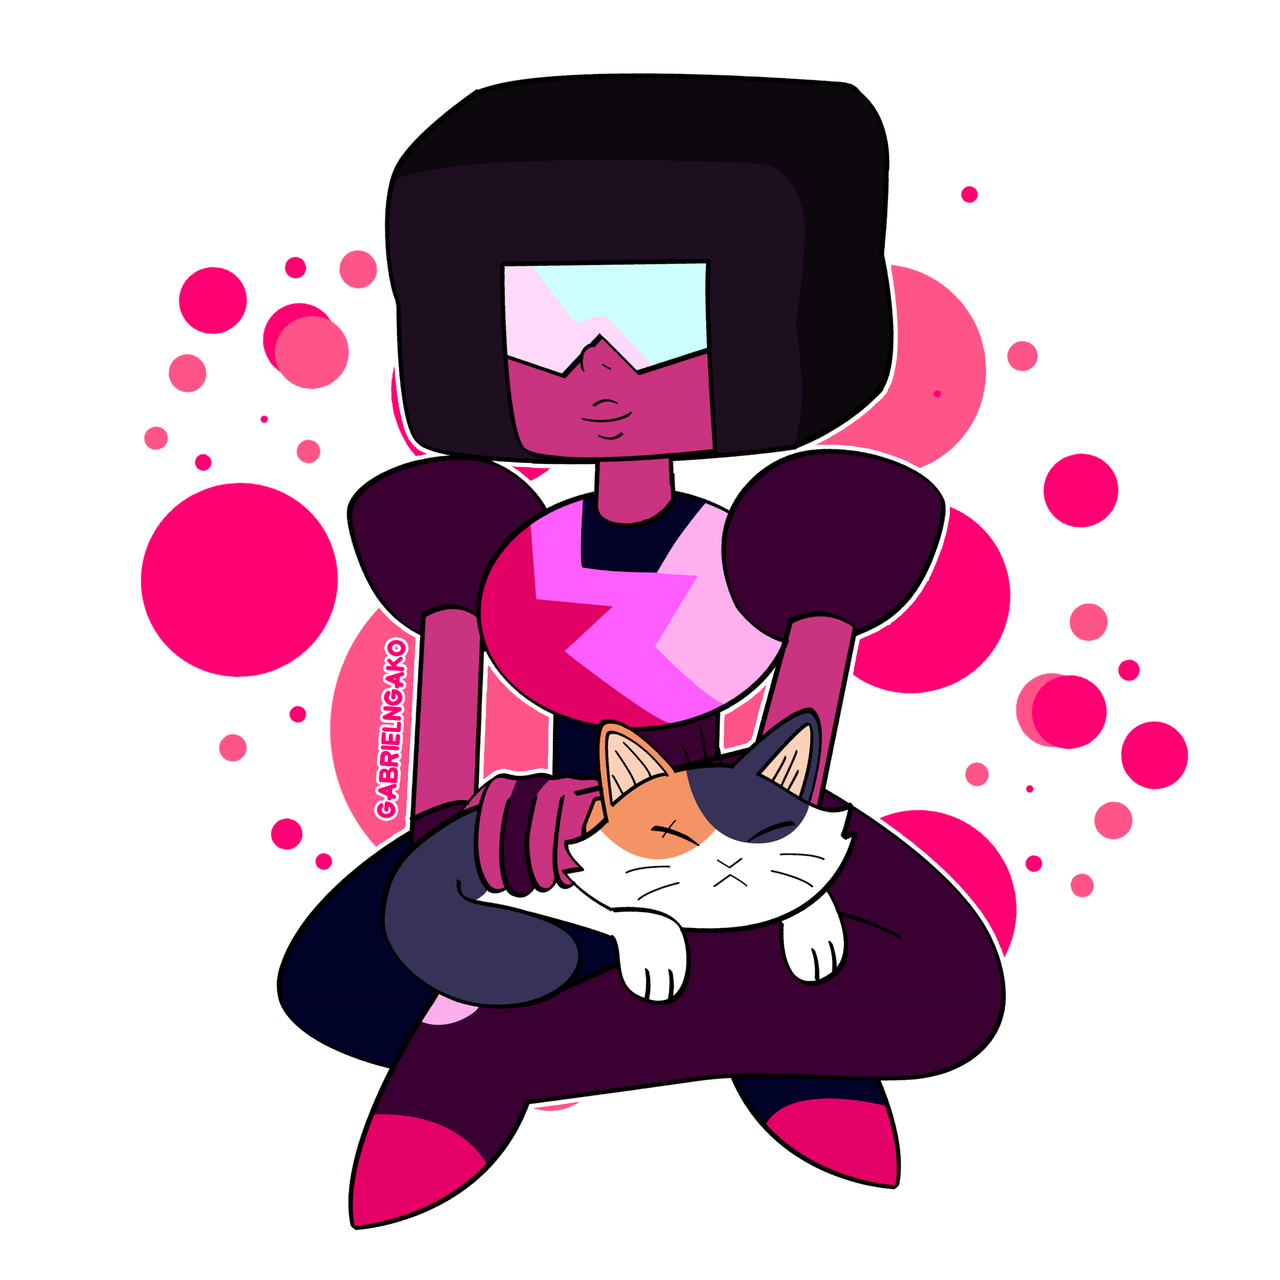 “Garnet and Cat Steven” heheeee~~~~~ FROM ONE OF THE RECENT EPISODES “POOL HOPPING”